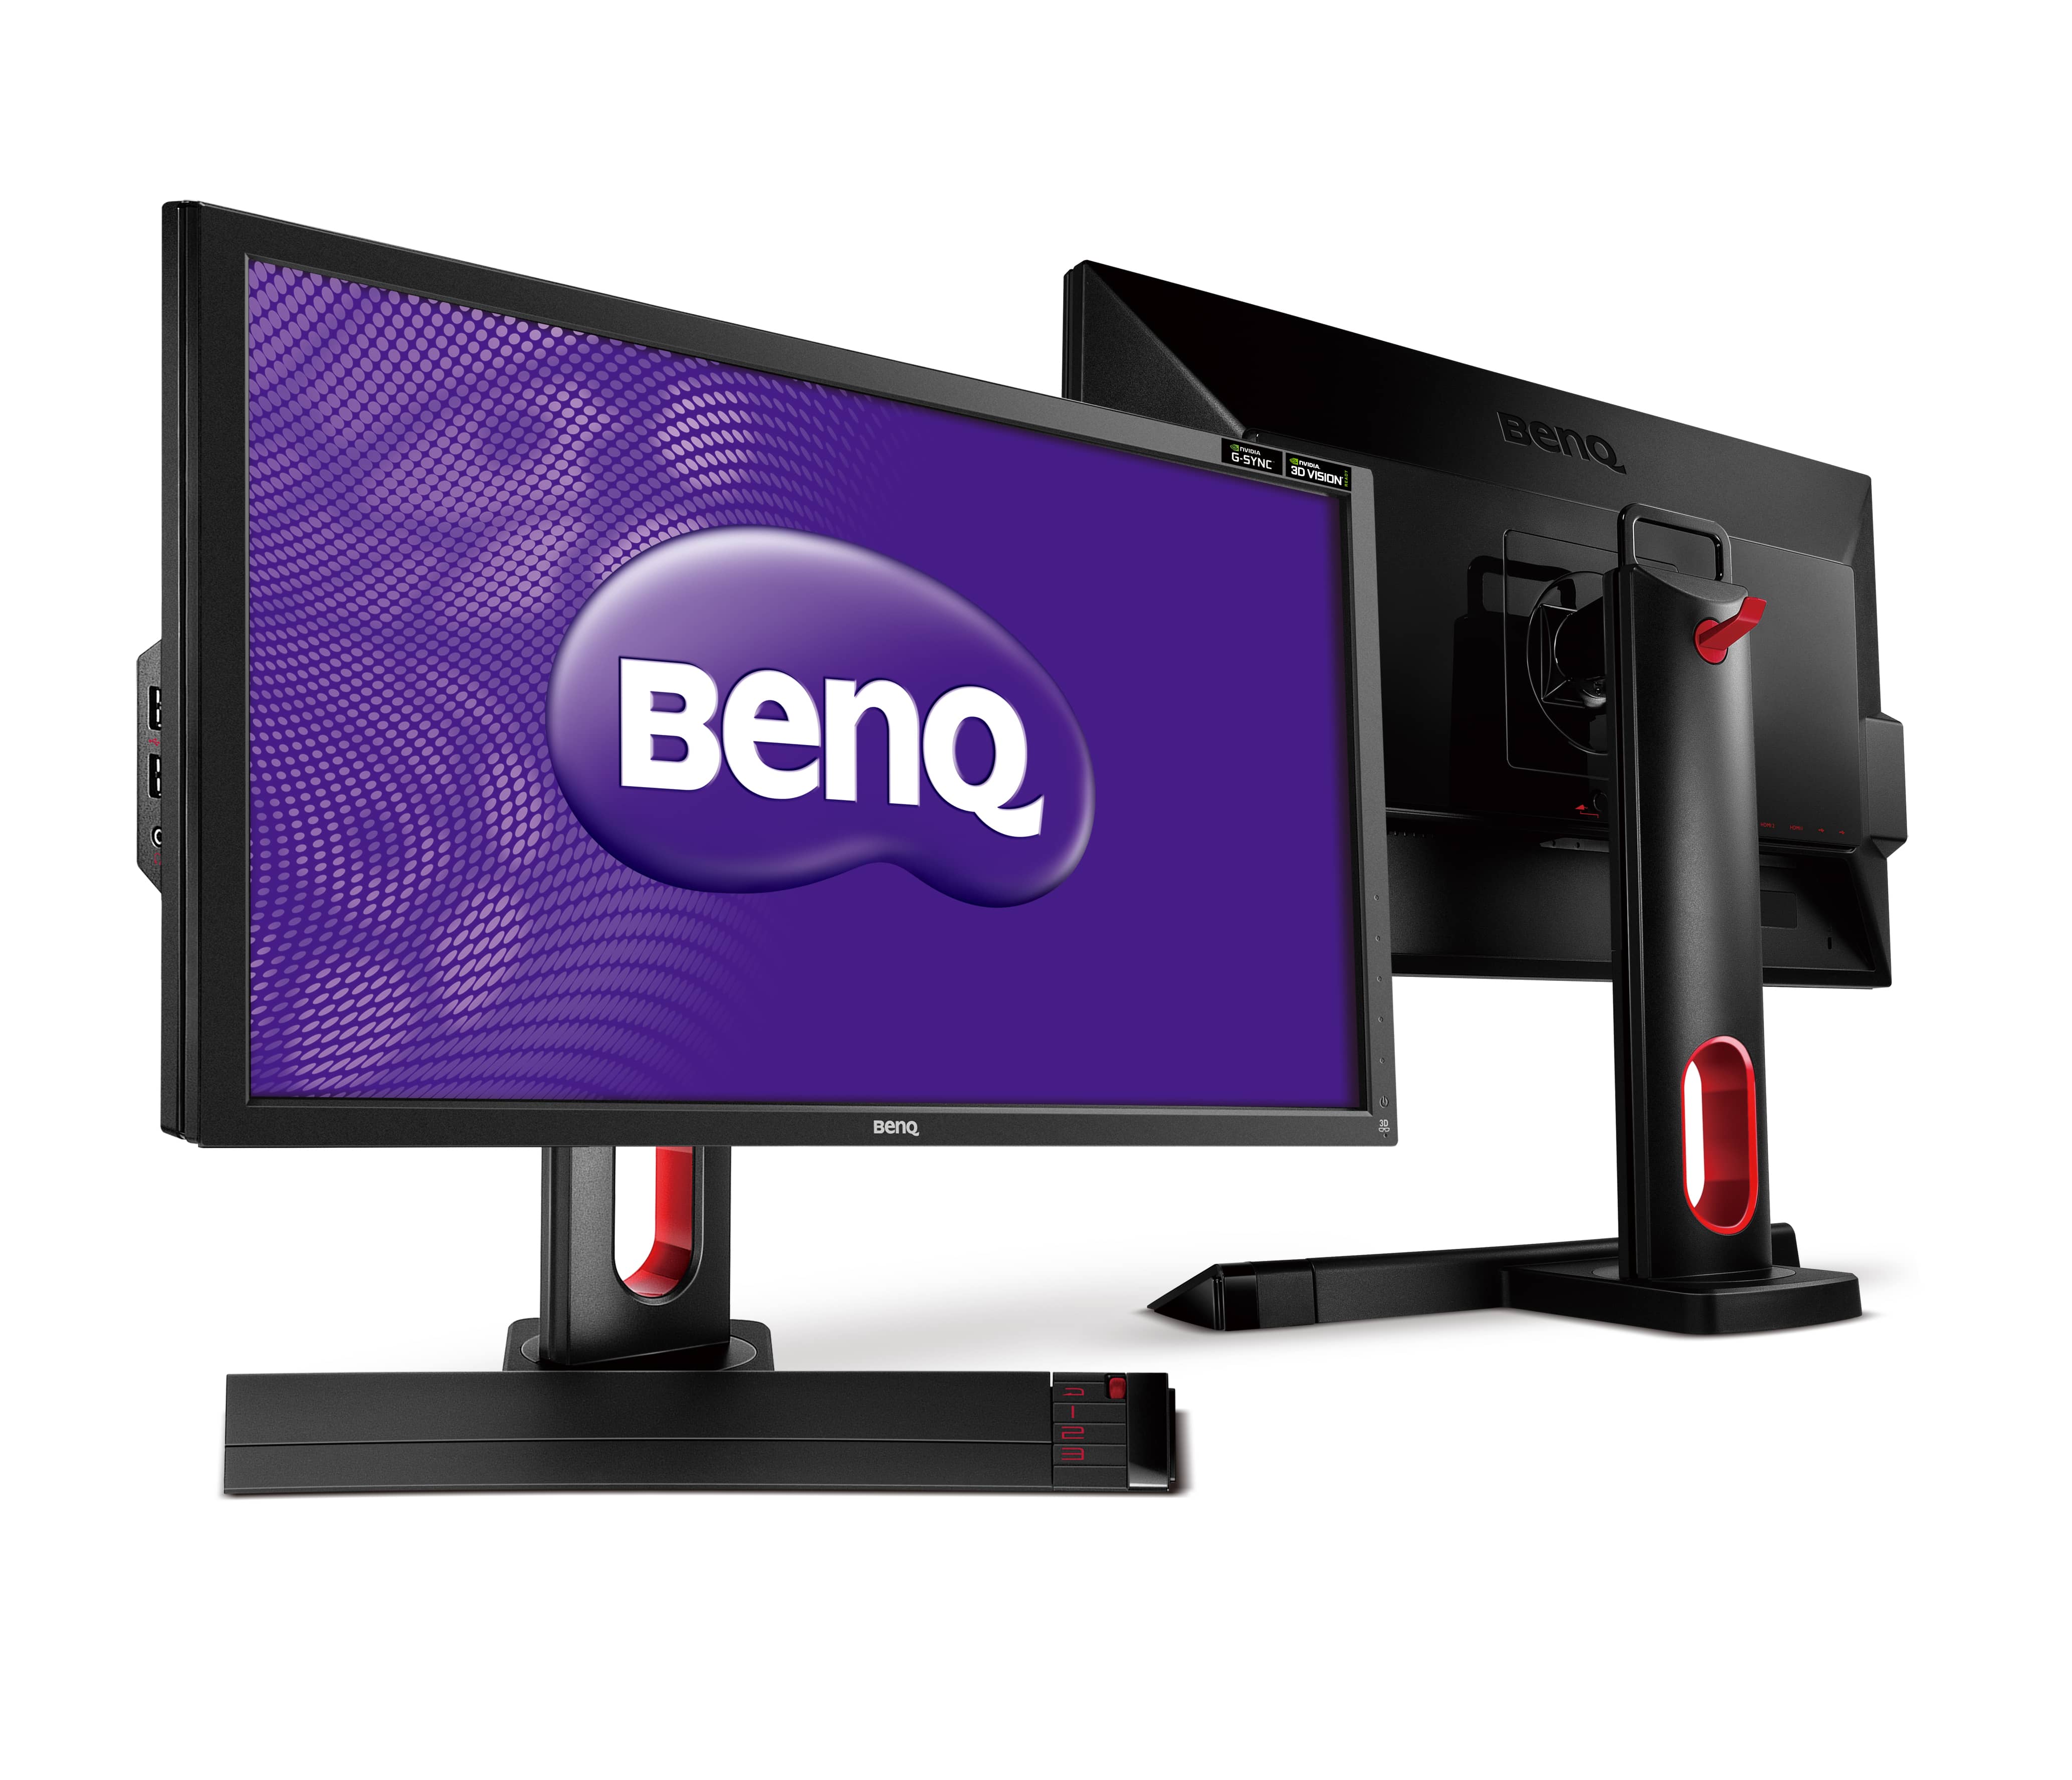 BenQ Corporation and Eindhoven: the perfect match